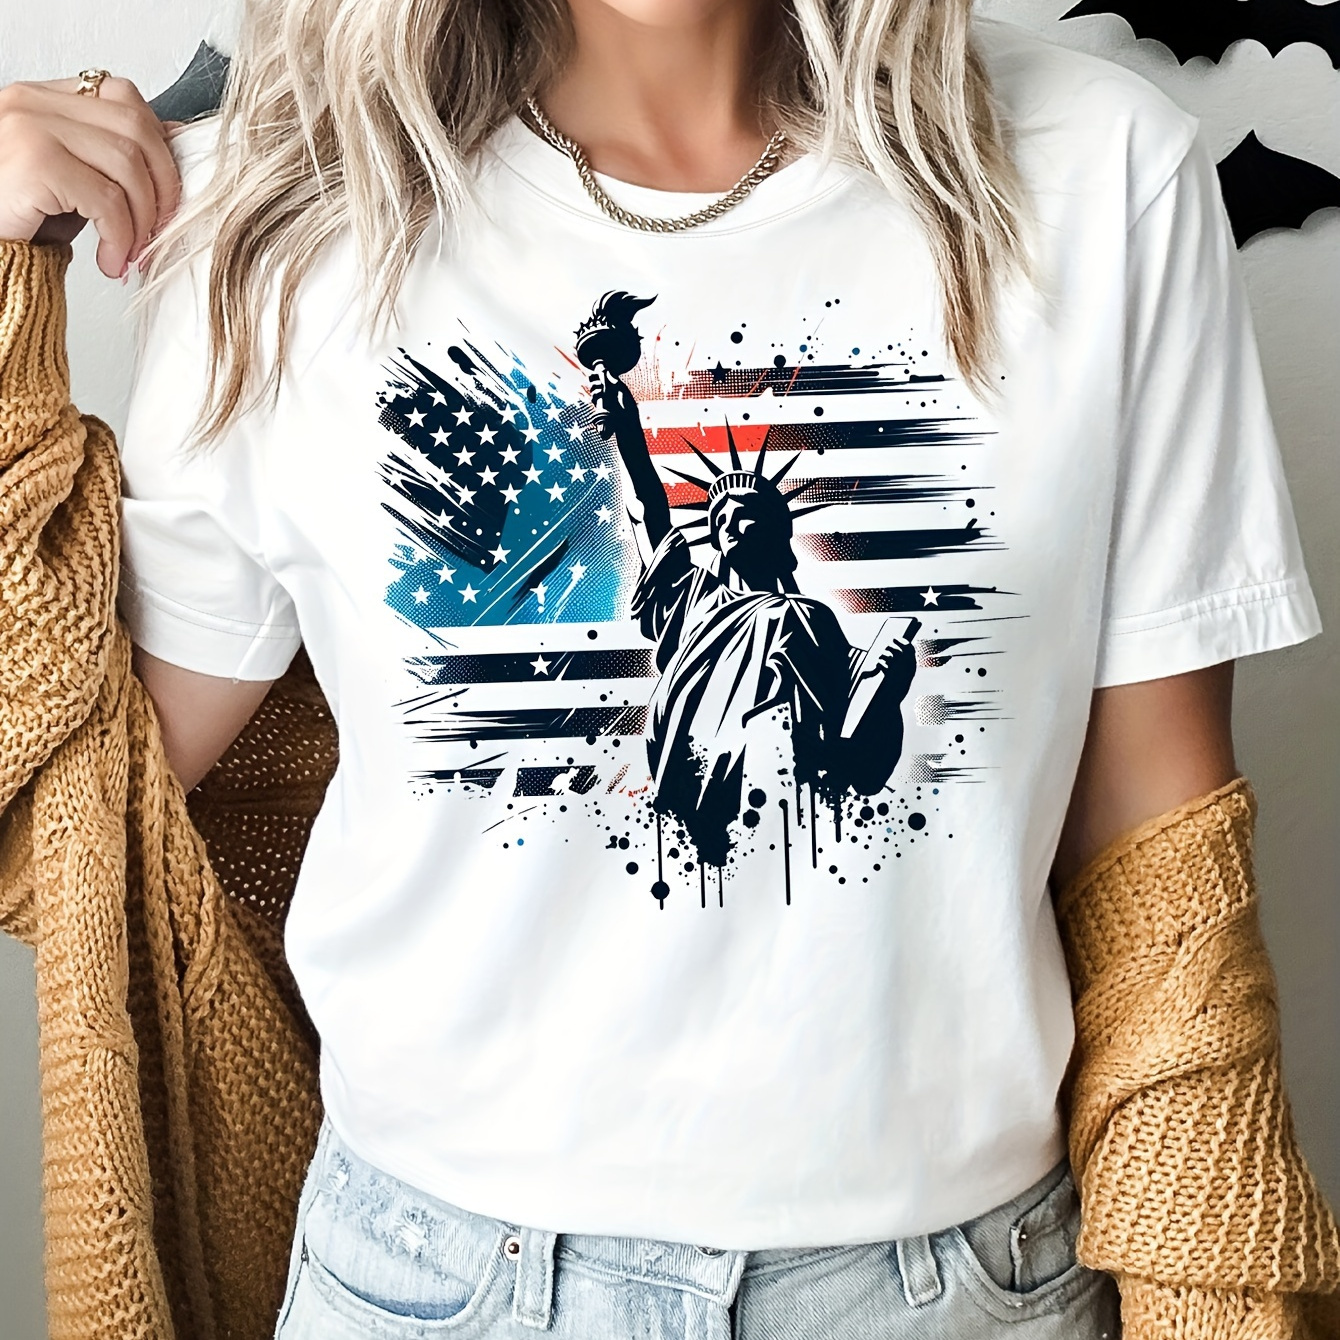 

Statue Of Print T-shirt, Short Sleeve Crew Neck Casual Top For Summer & Spring, Women's Clothing